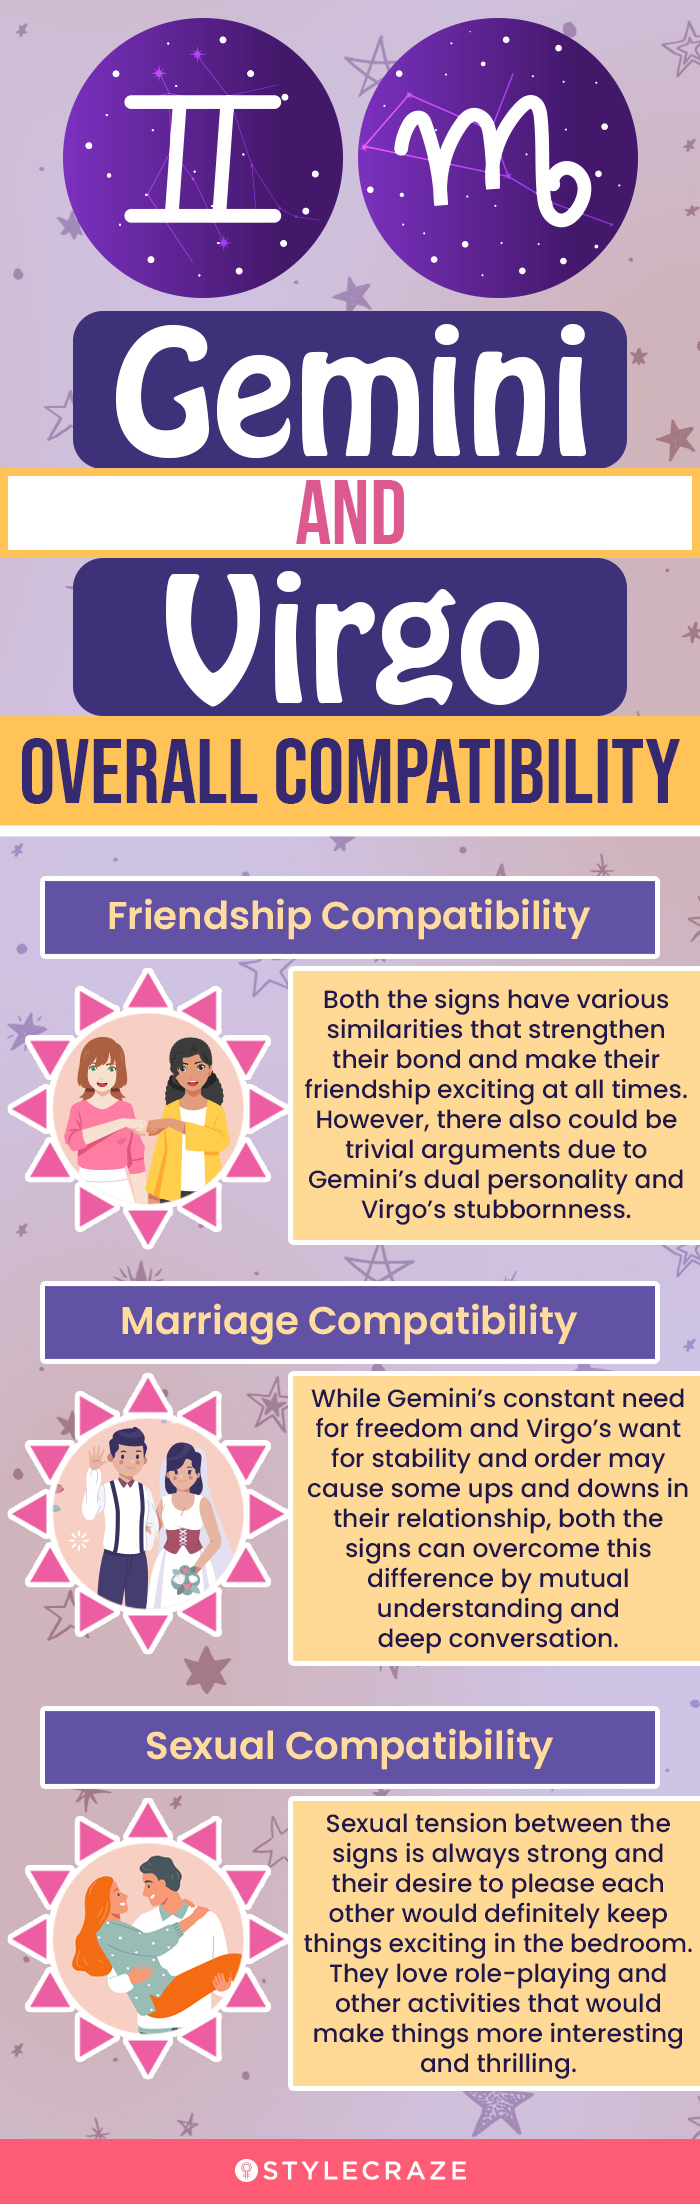 gemini and virgo overall compatibility (infographic)